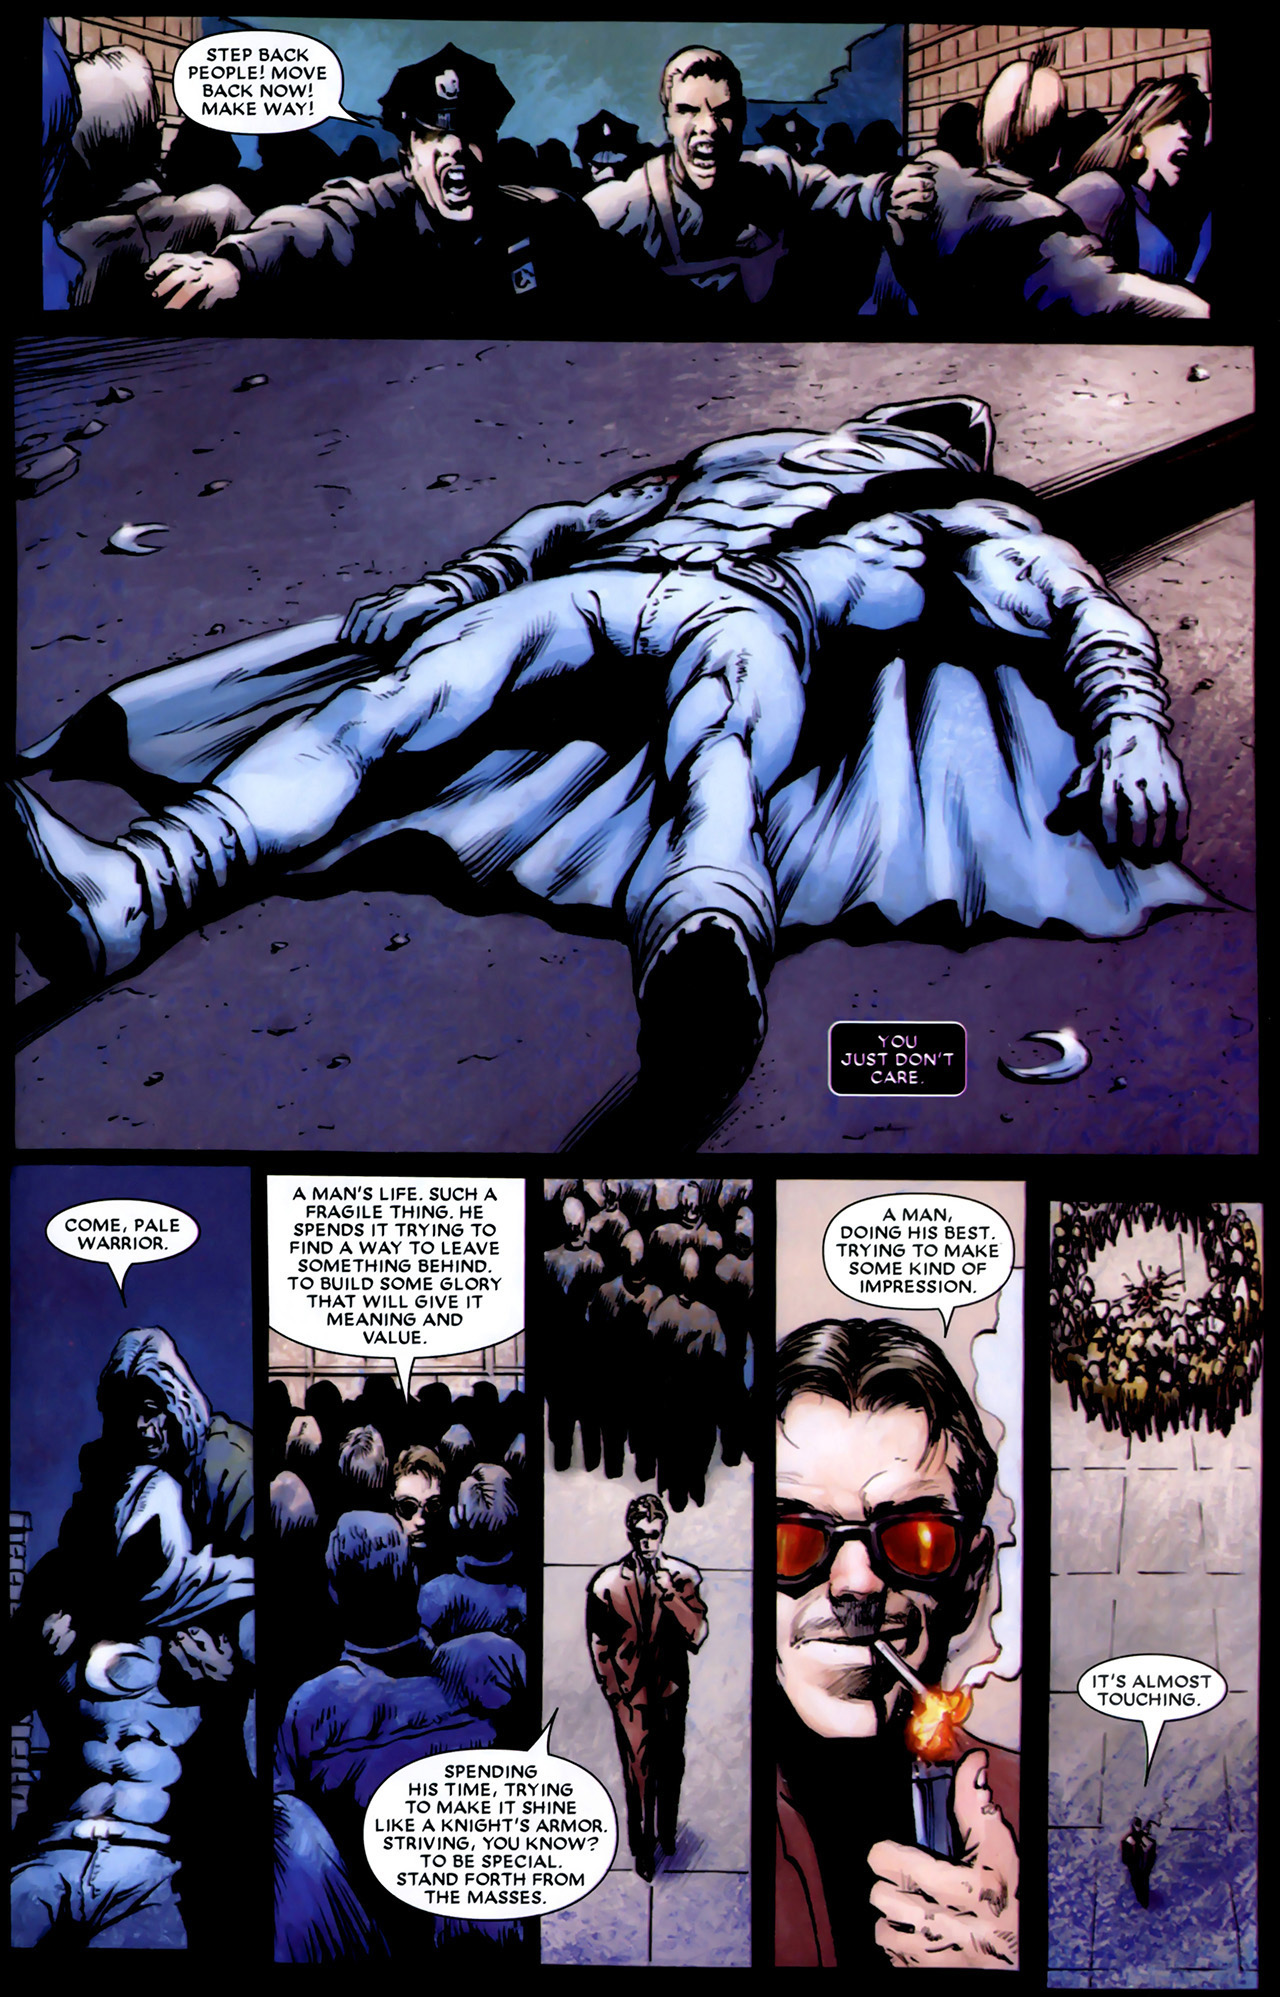  Moon Knight #19 - God and Country, Conclusion